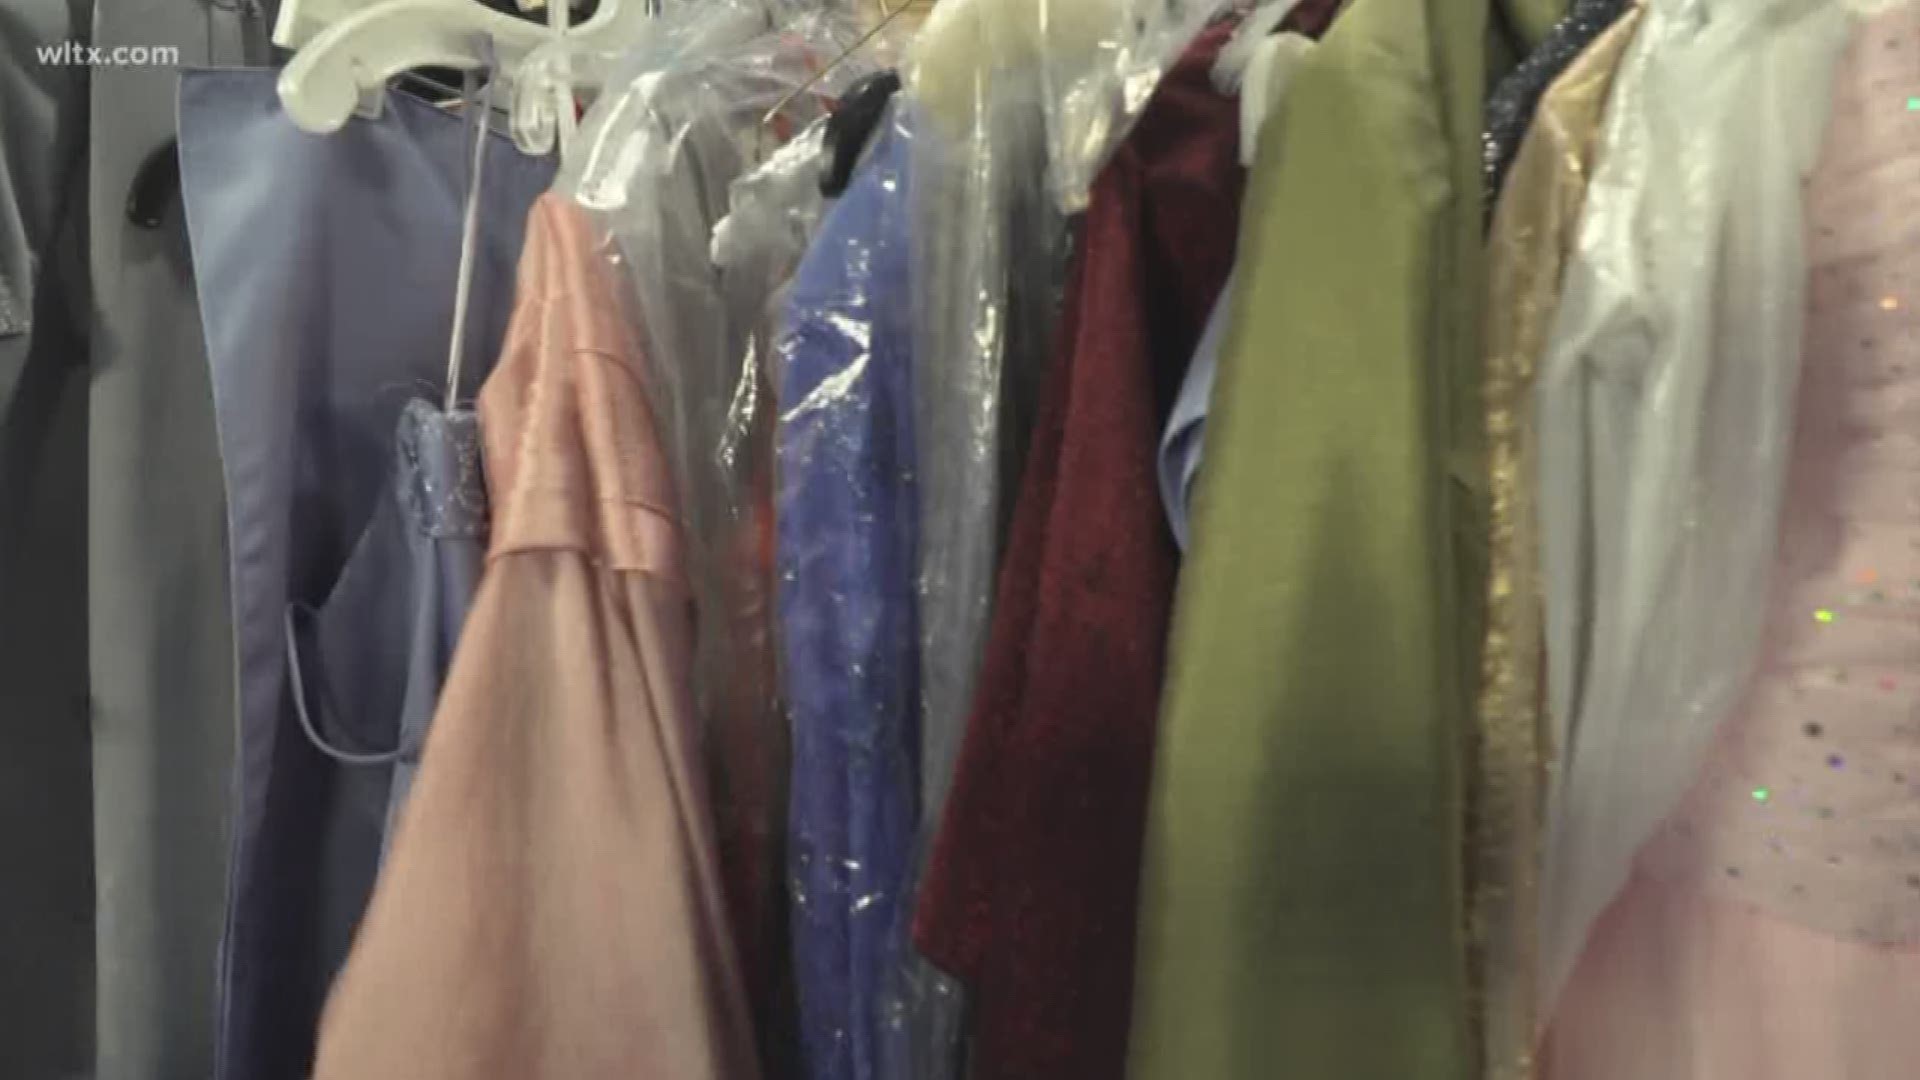 The South Carolina Bar and members of Alpha Kappa Alpha Sorority, Inc. are excited to receive dresses for the 18th Annual Cinderella Project.